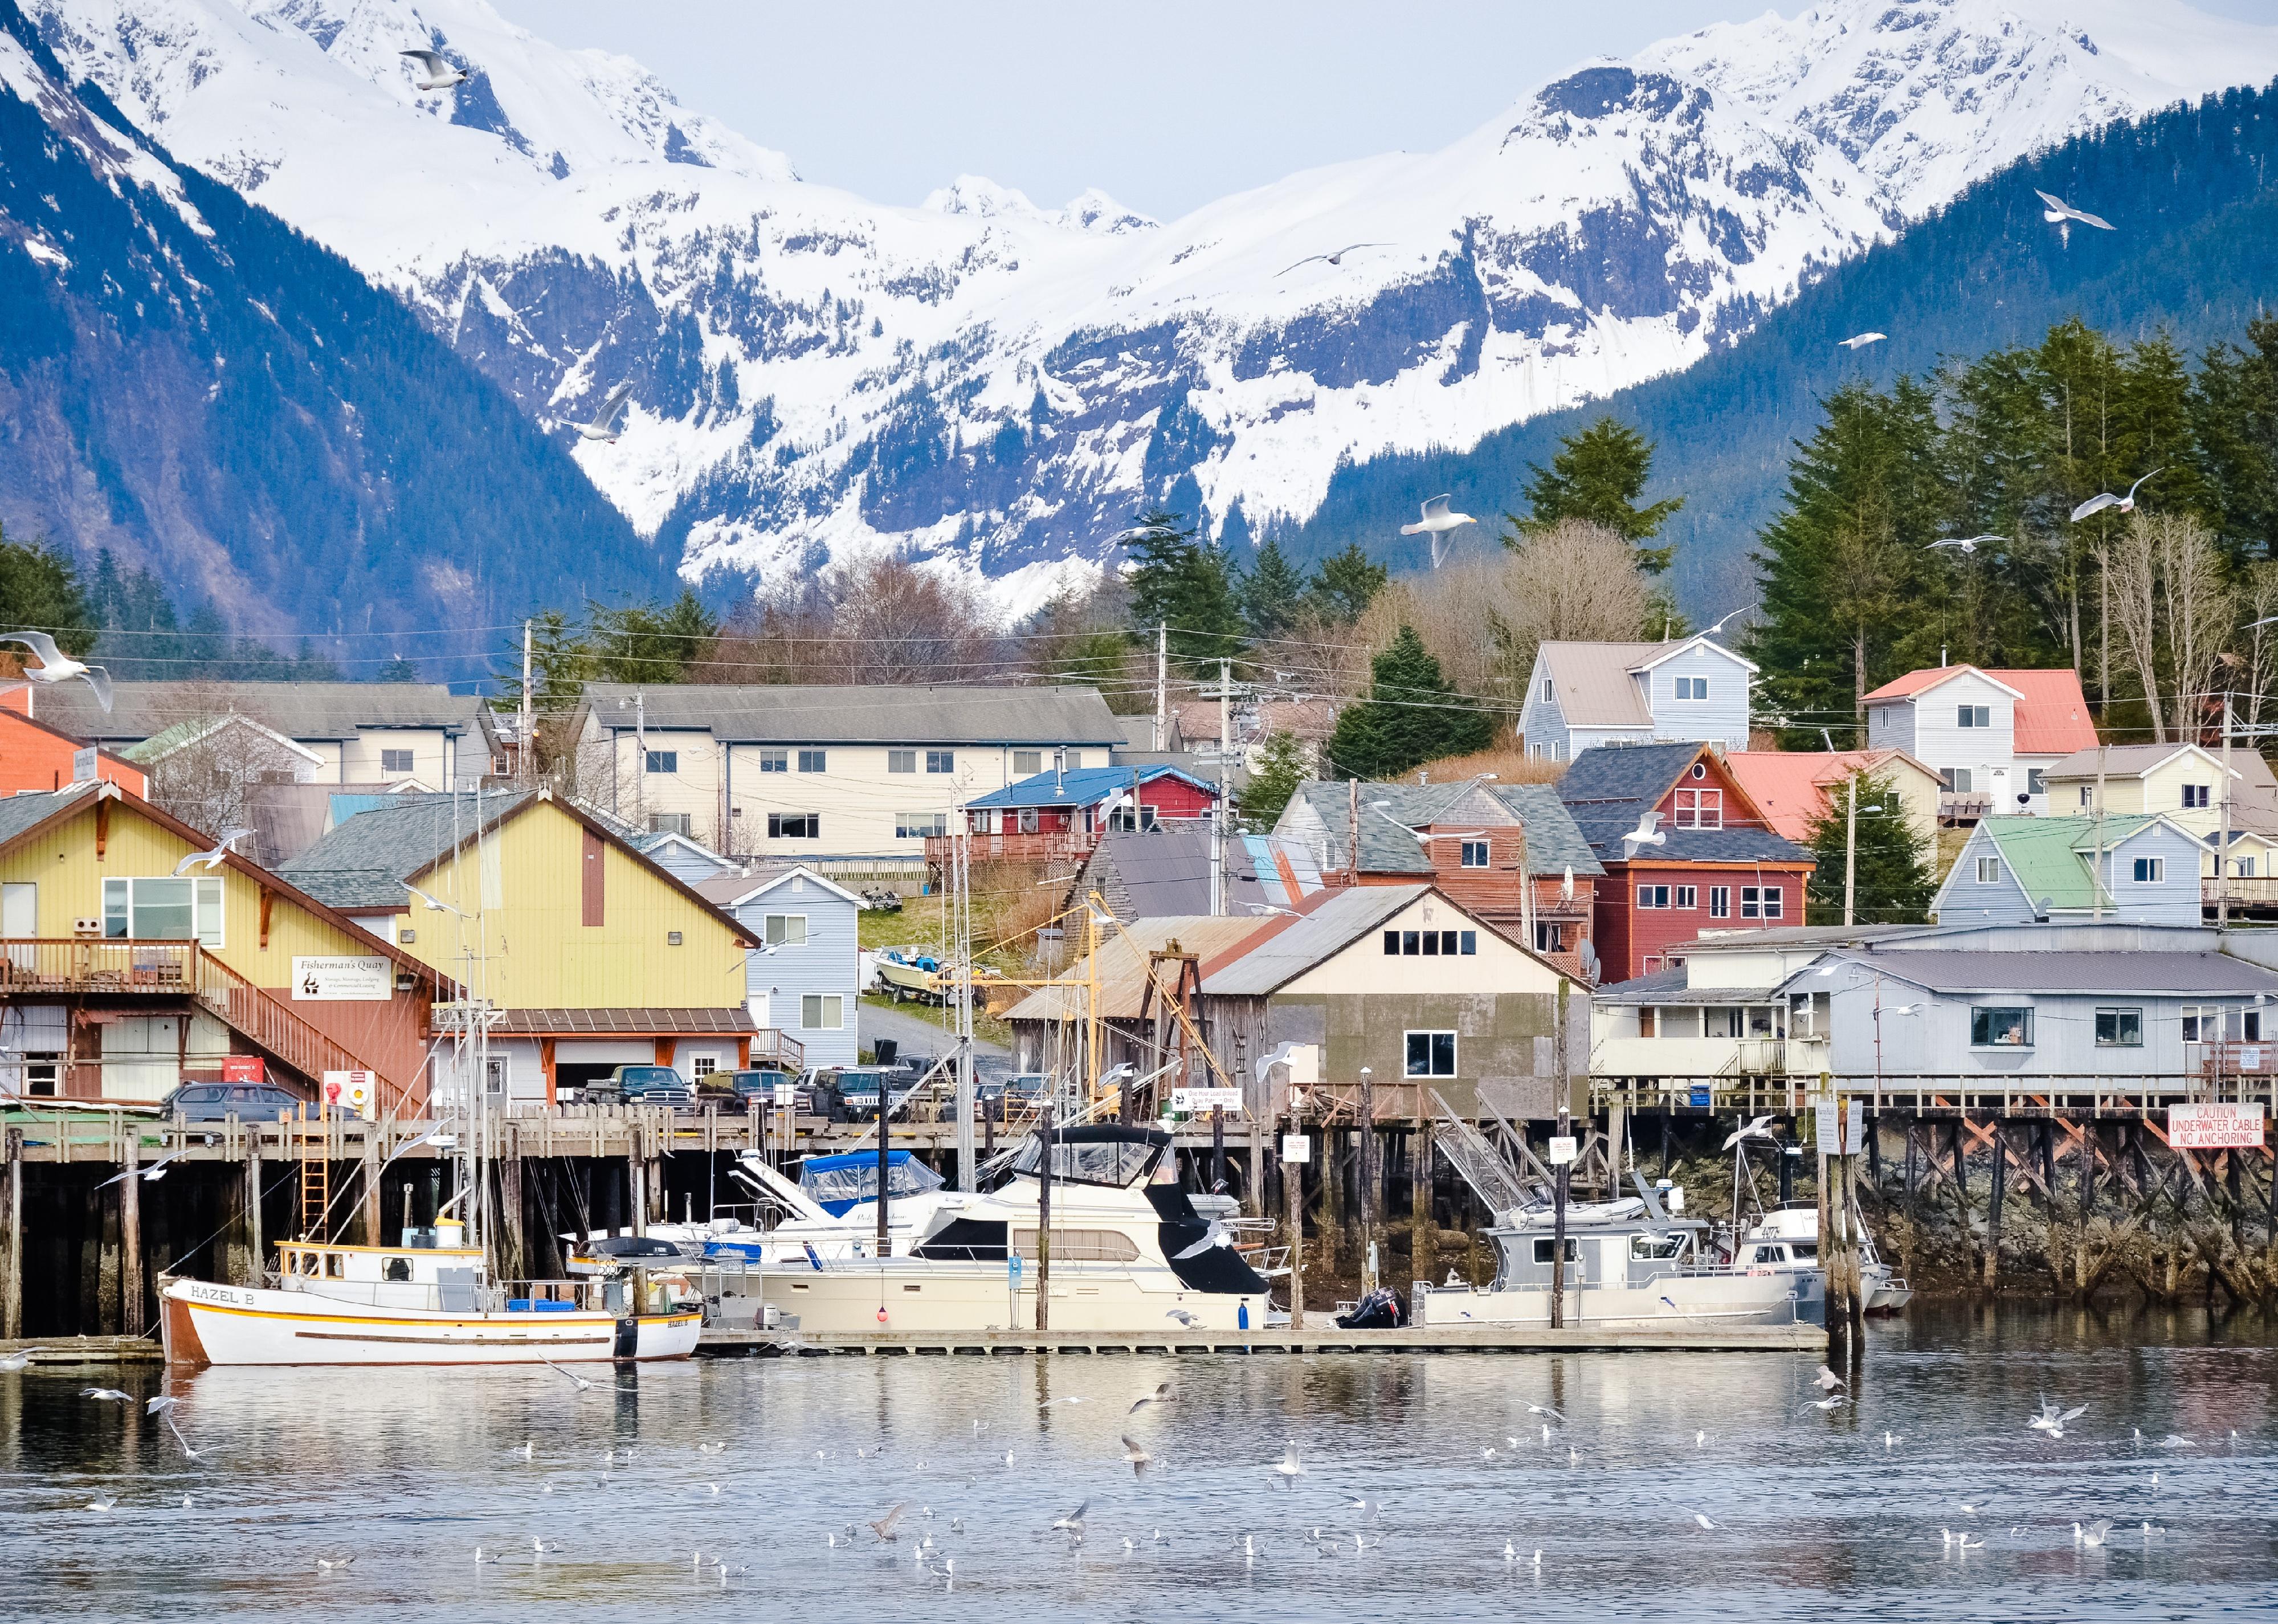 View of Sitka Alaska Boats and Buildings from the Water.